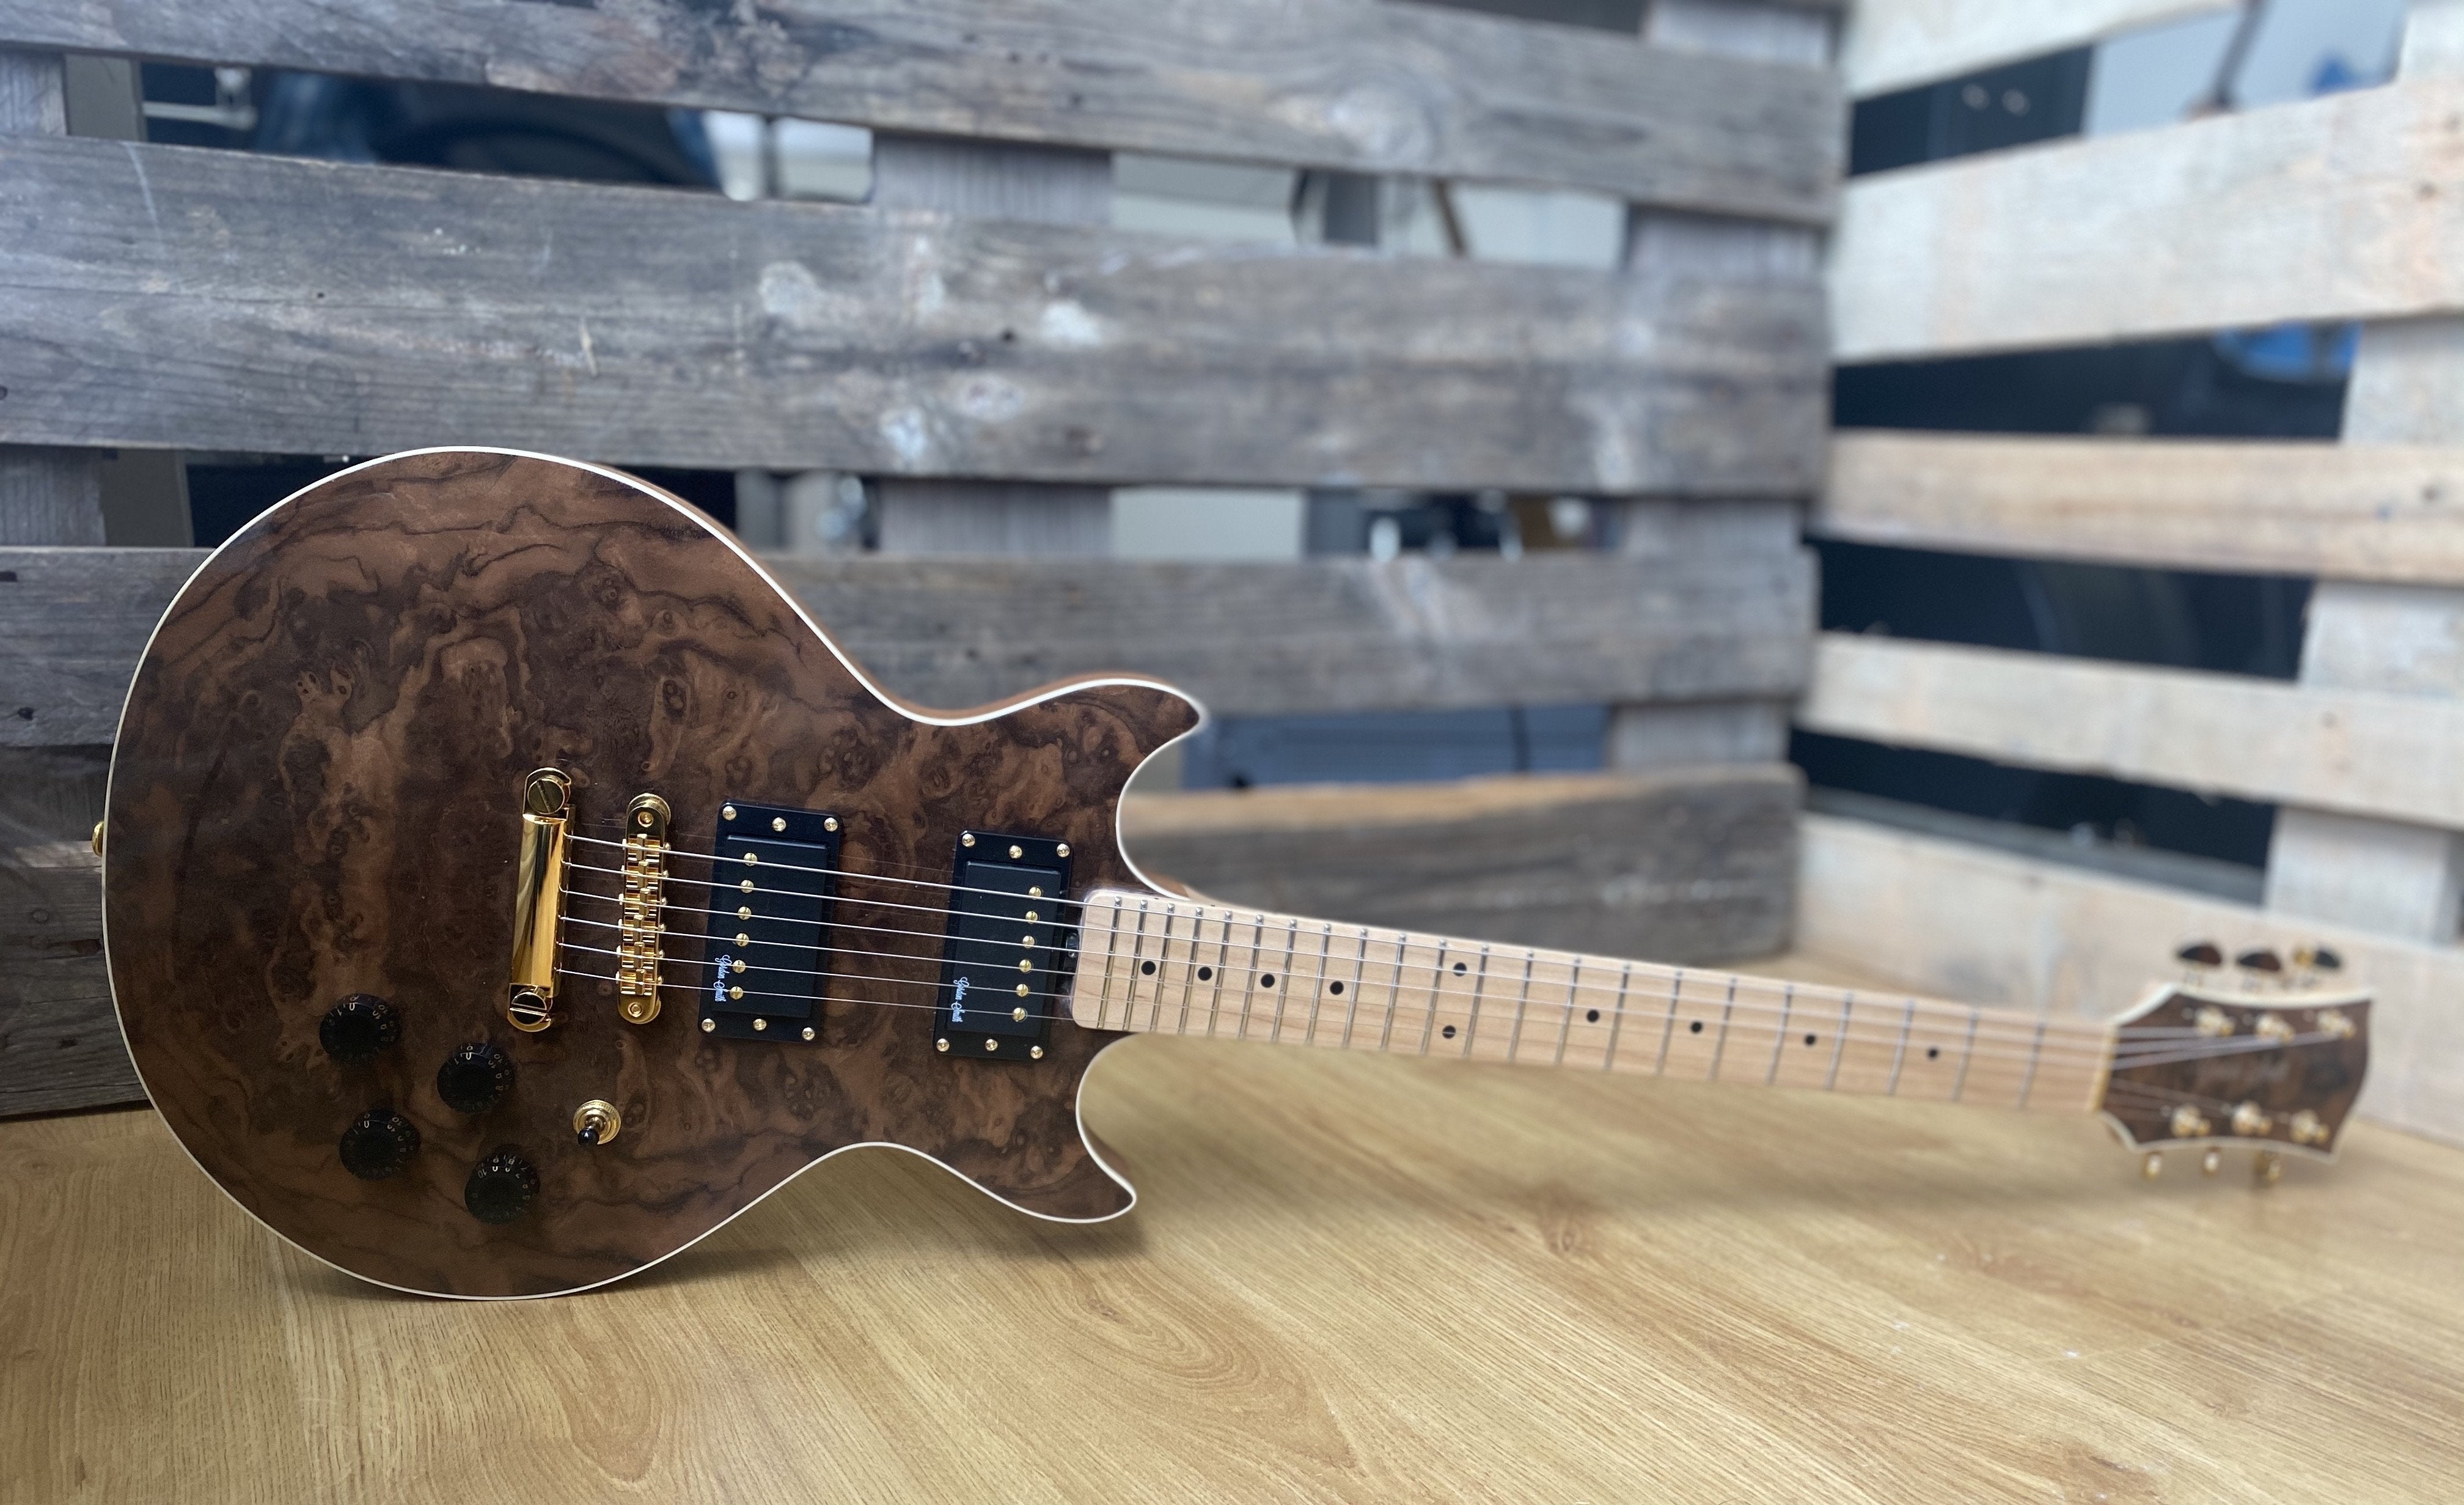 Gordon Smith GS Deluxe Burled Walnut Custom, Electric Guitar for sale at Richards Guitars.